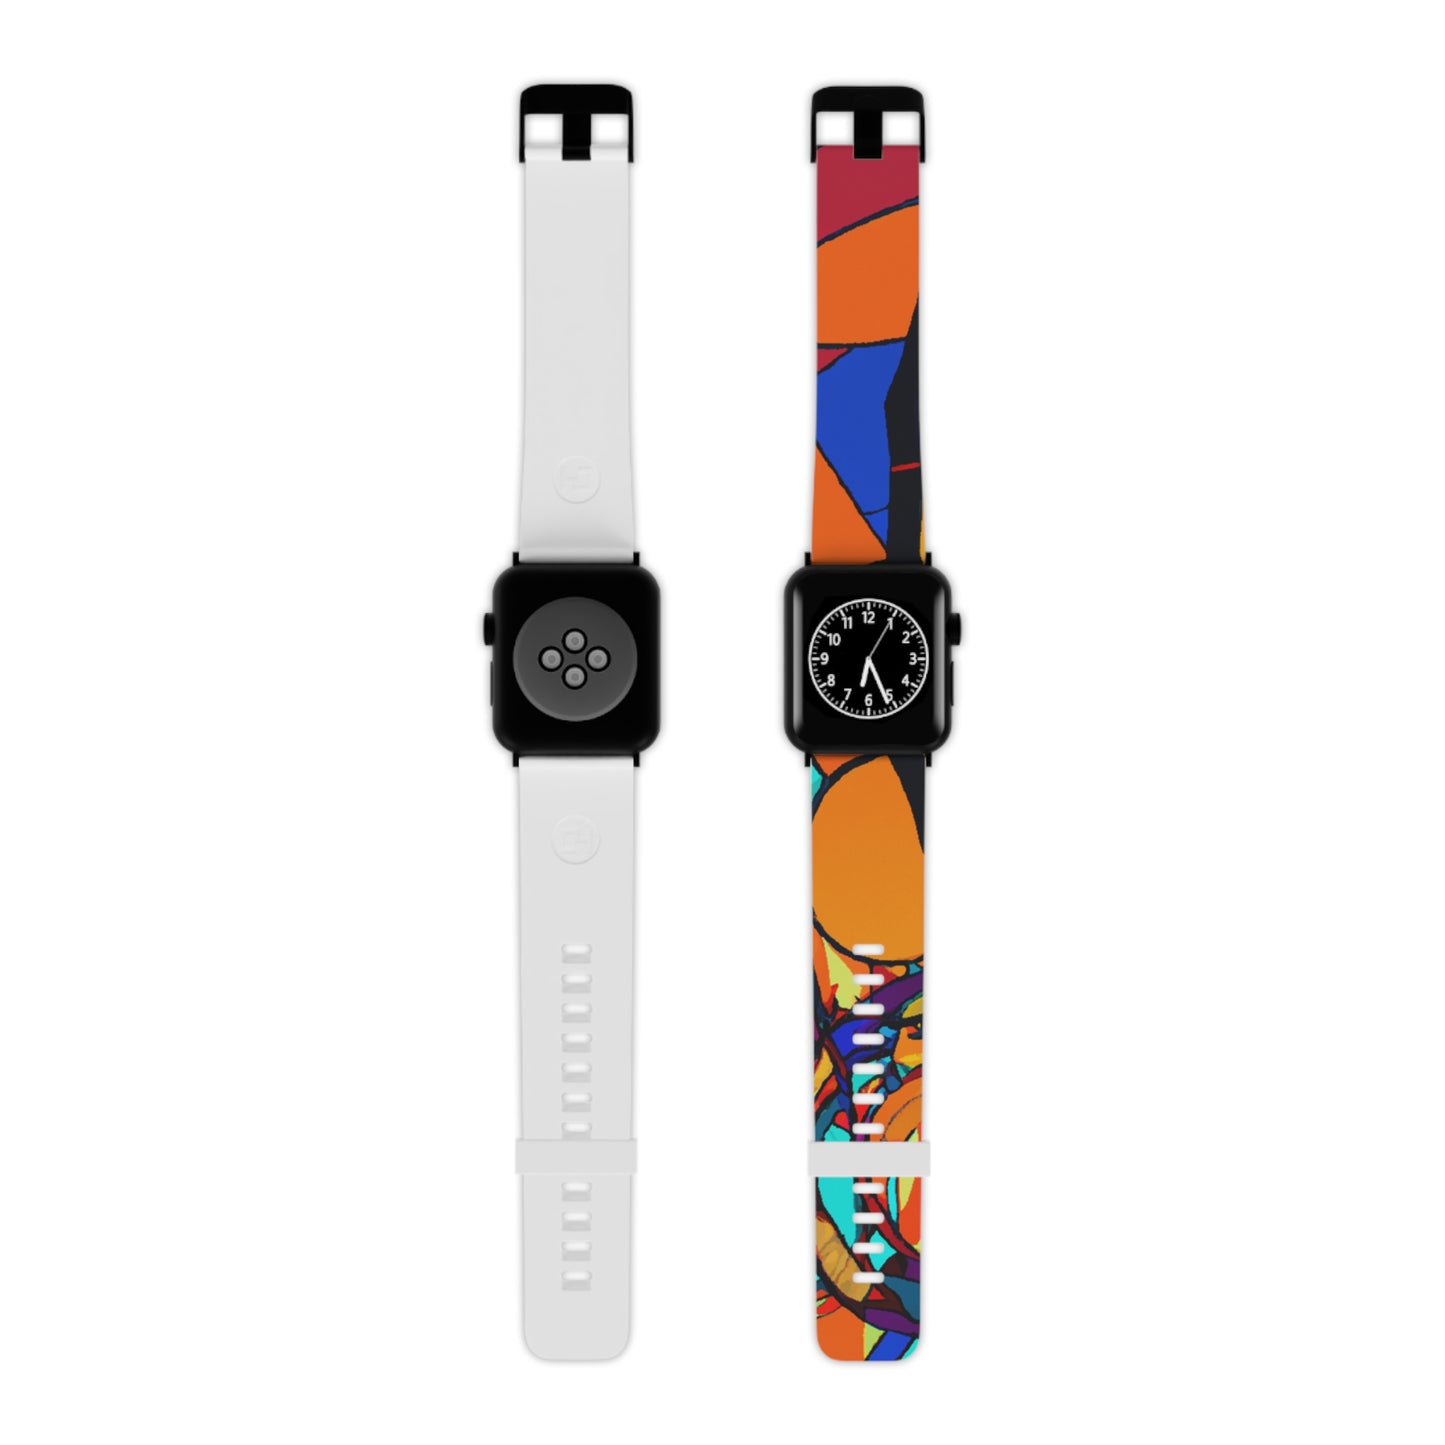 Augustus Fowle - Trippy Hippy Boho Psychedelic Apple Wrist Watch Band